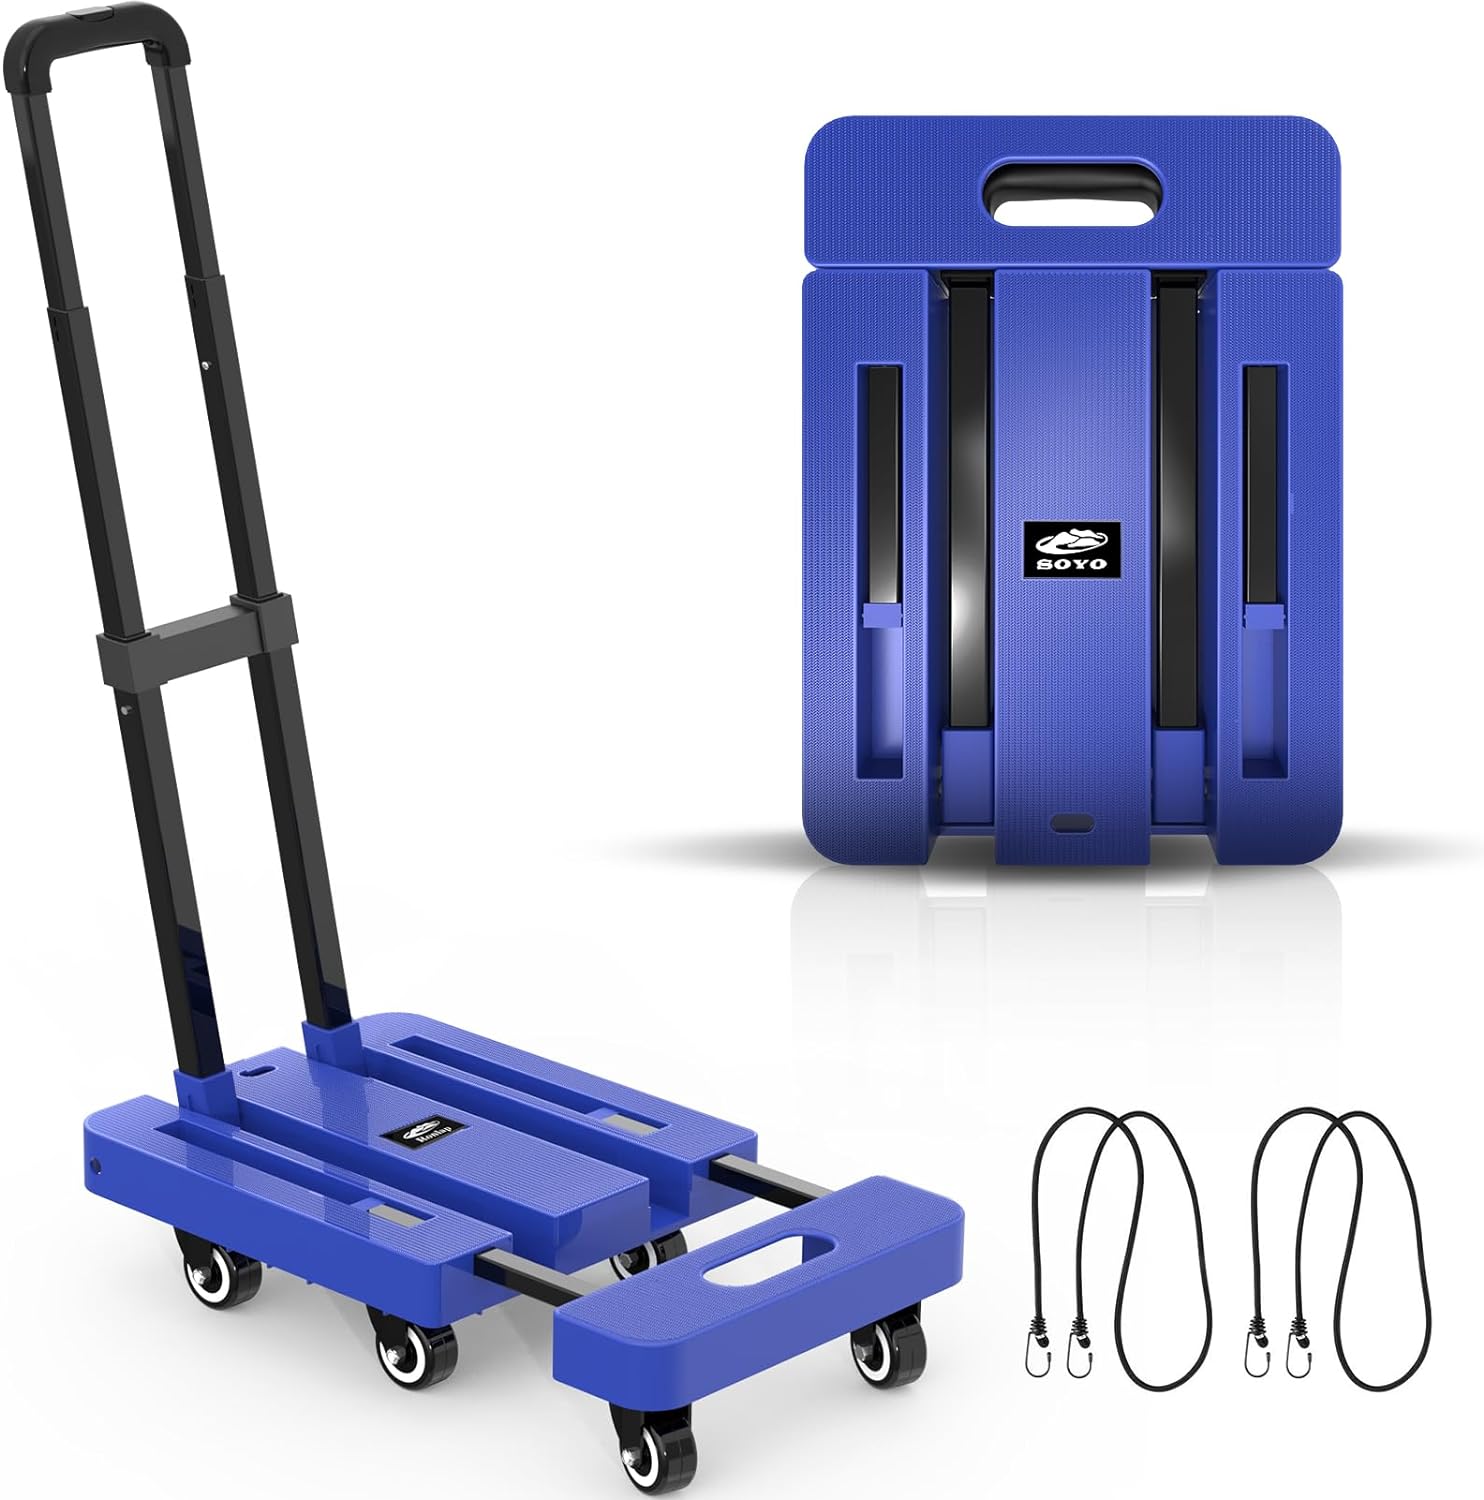 Ronlap Folding Hand Truck, Foldable Dolly Cart for Moving, 500lbs